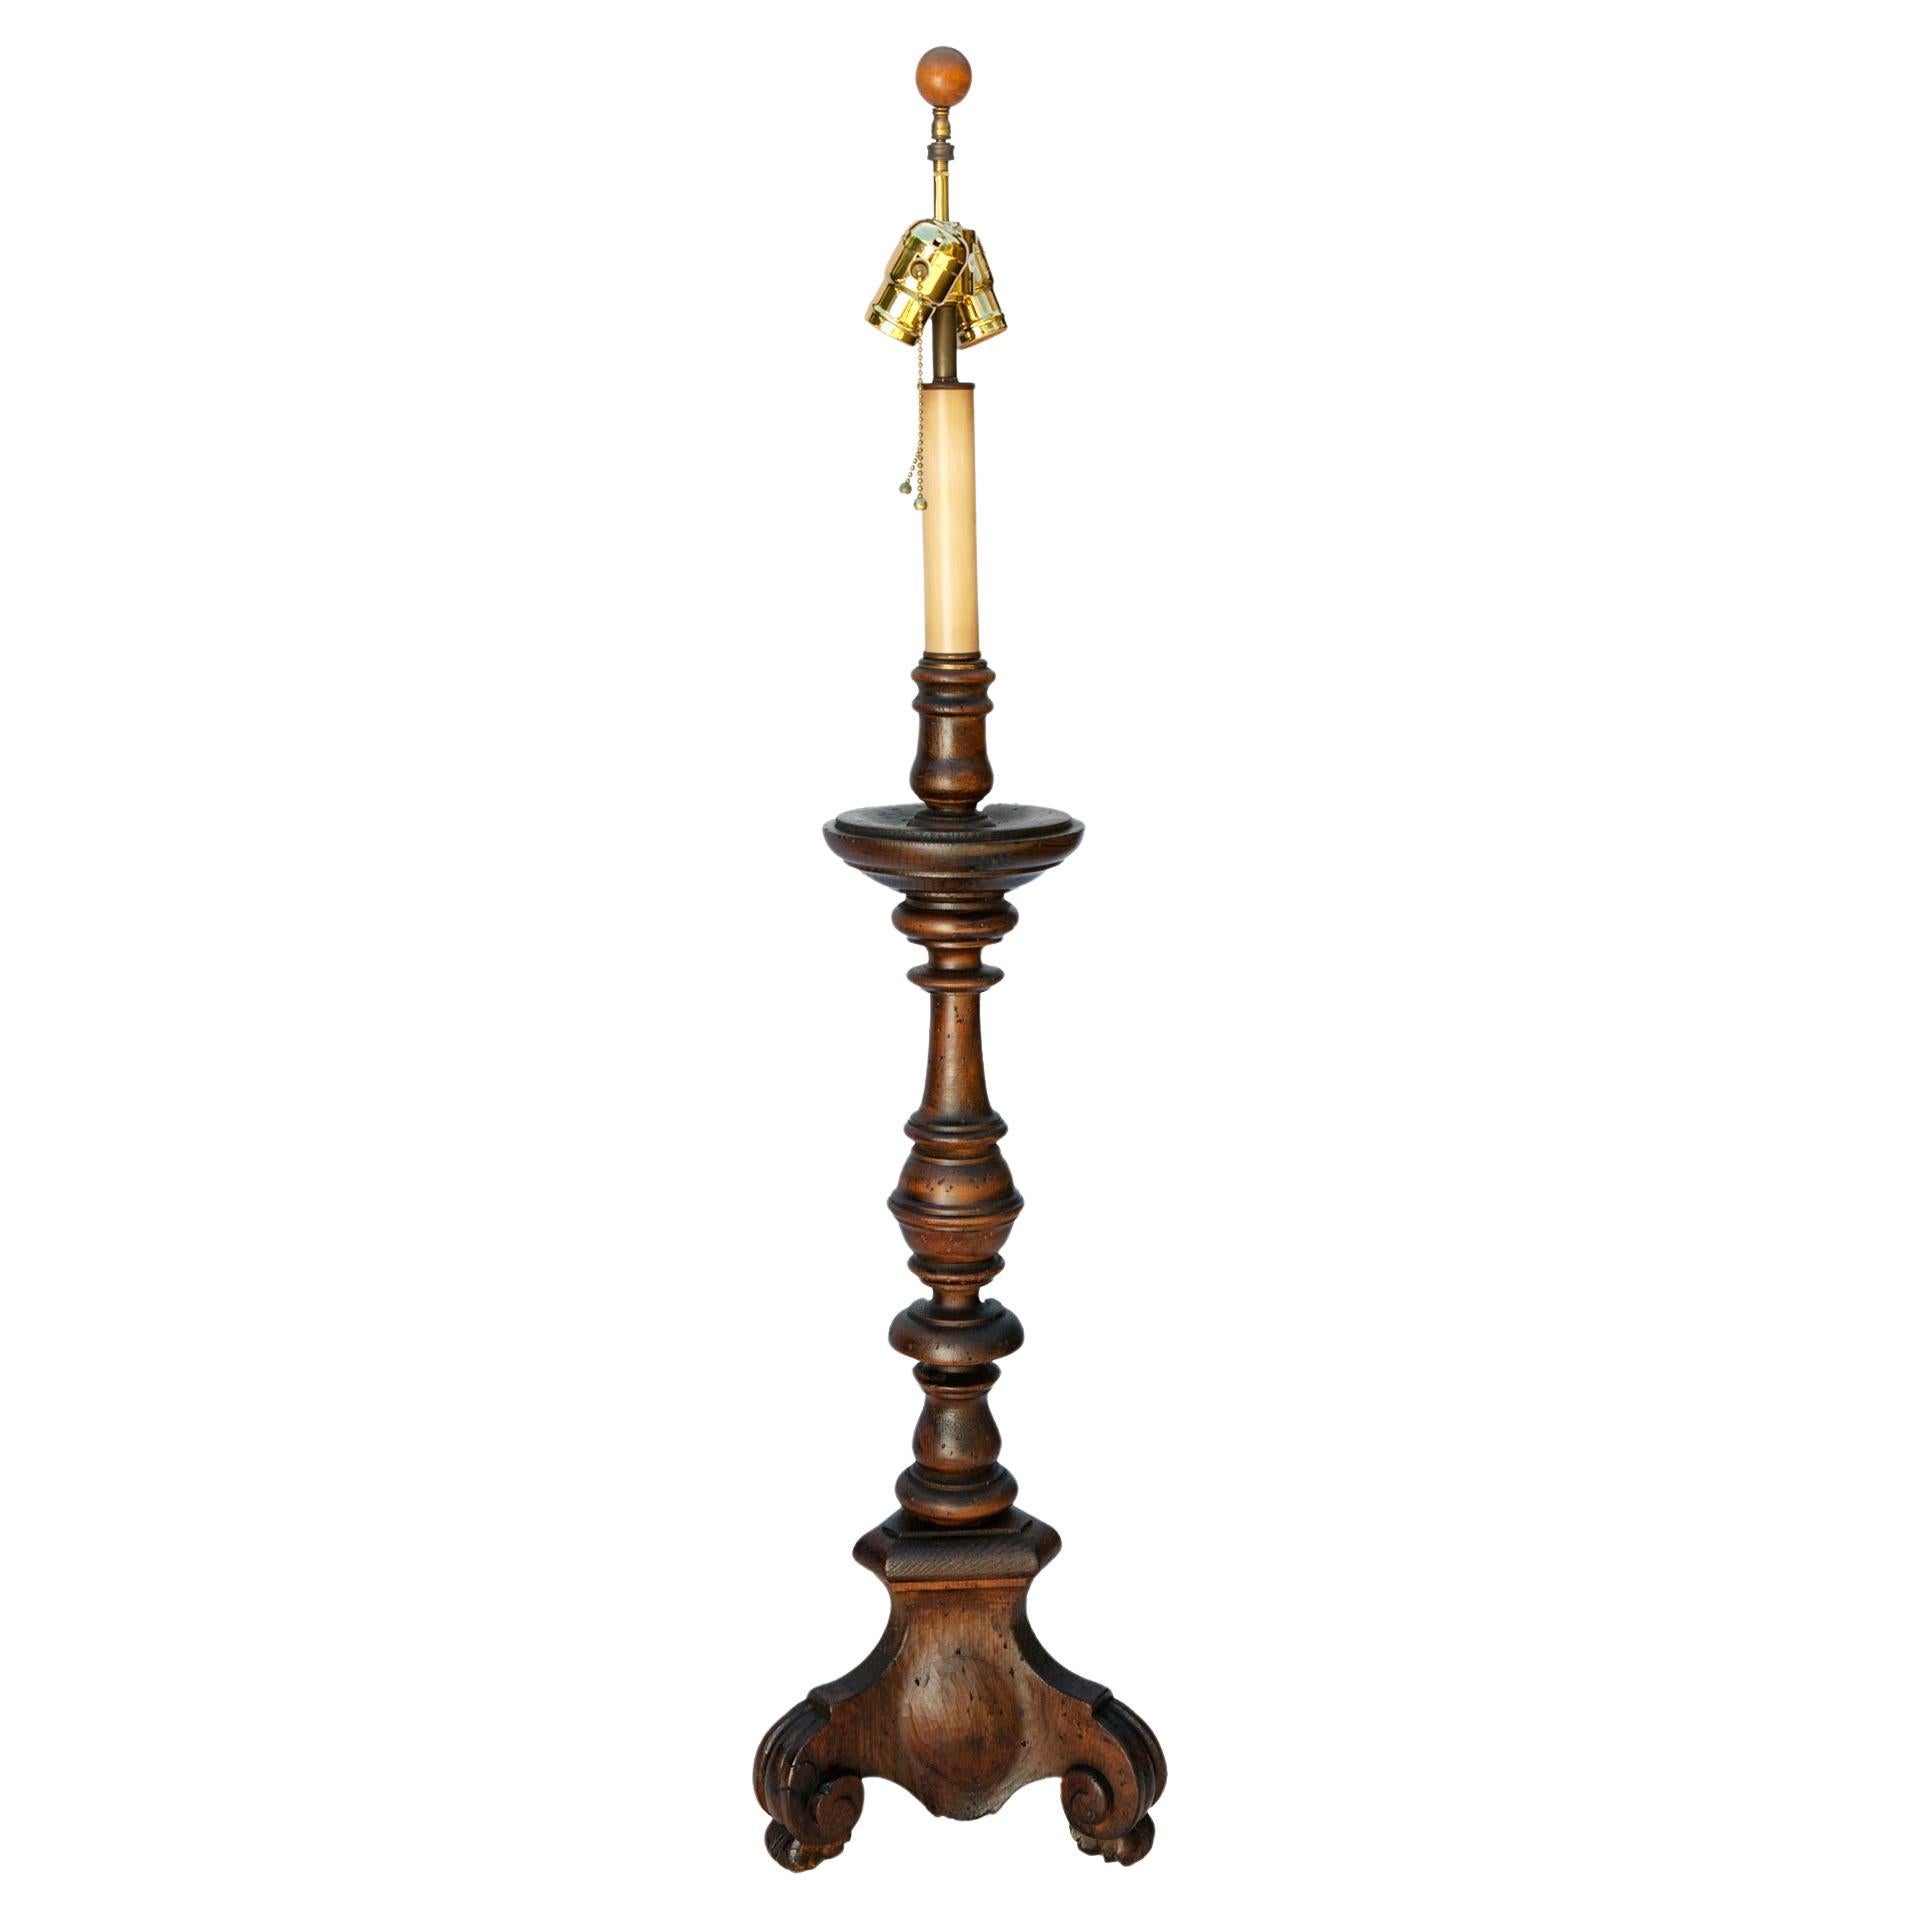 Hand carved candlestick lamp by Chapman Manufacturing company with dark  walnut finish. Polished brass lamp works providing directional lighting with two light sources.
New linen shade is included.